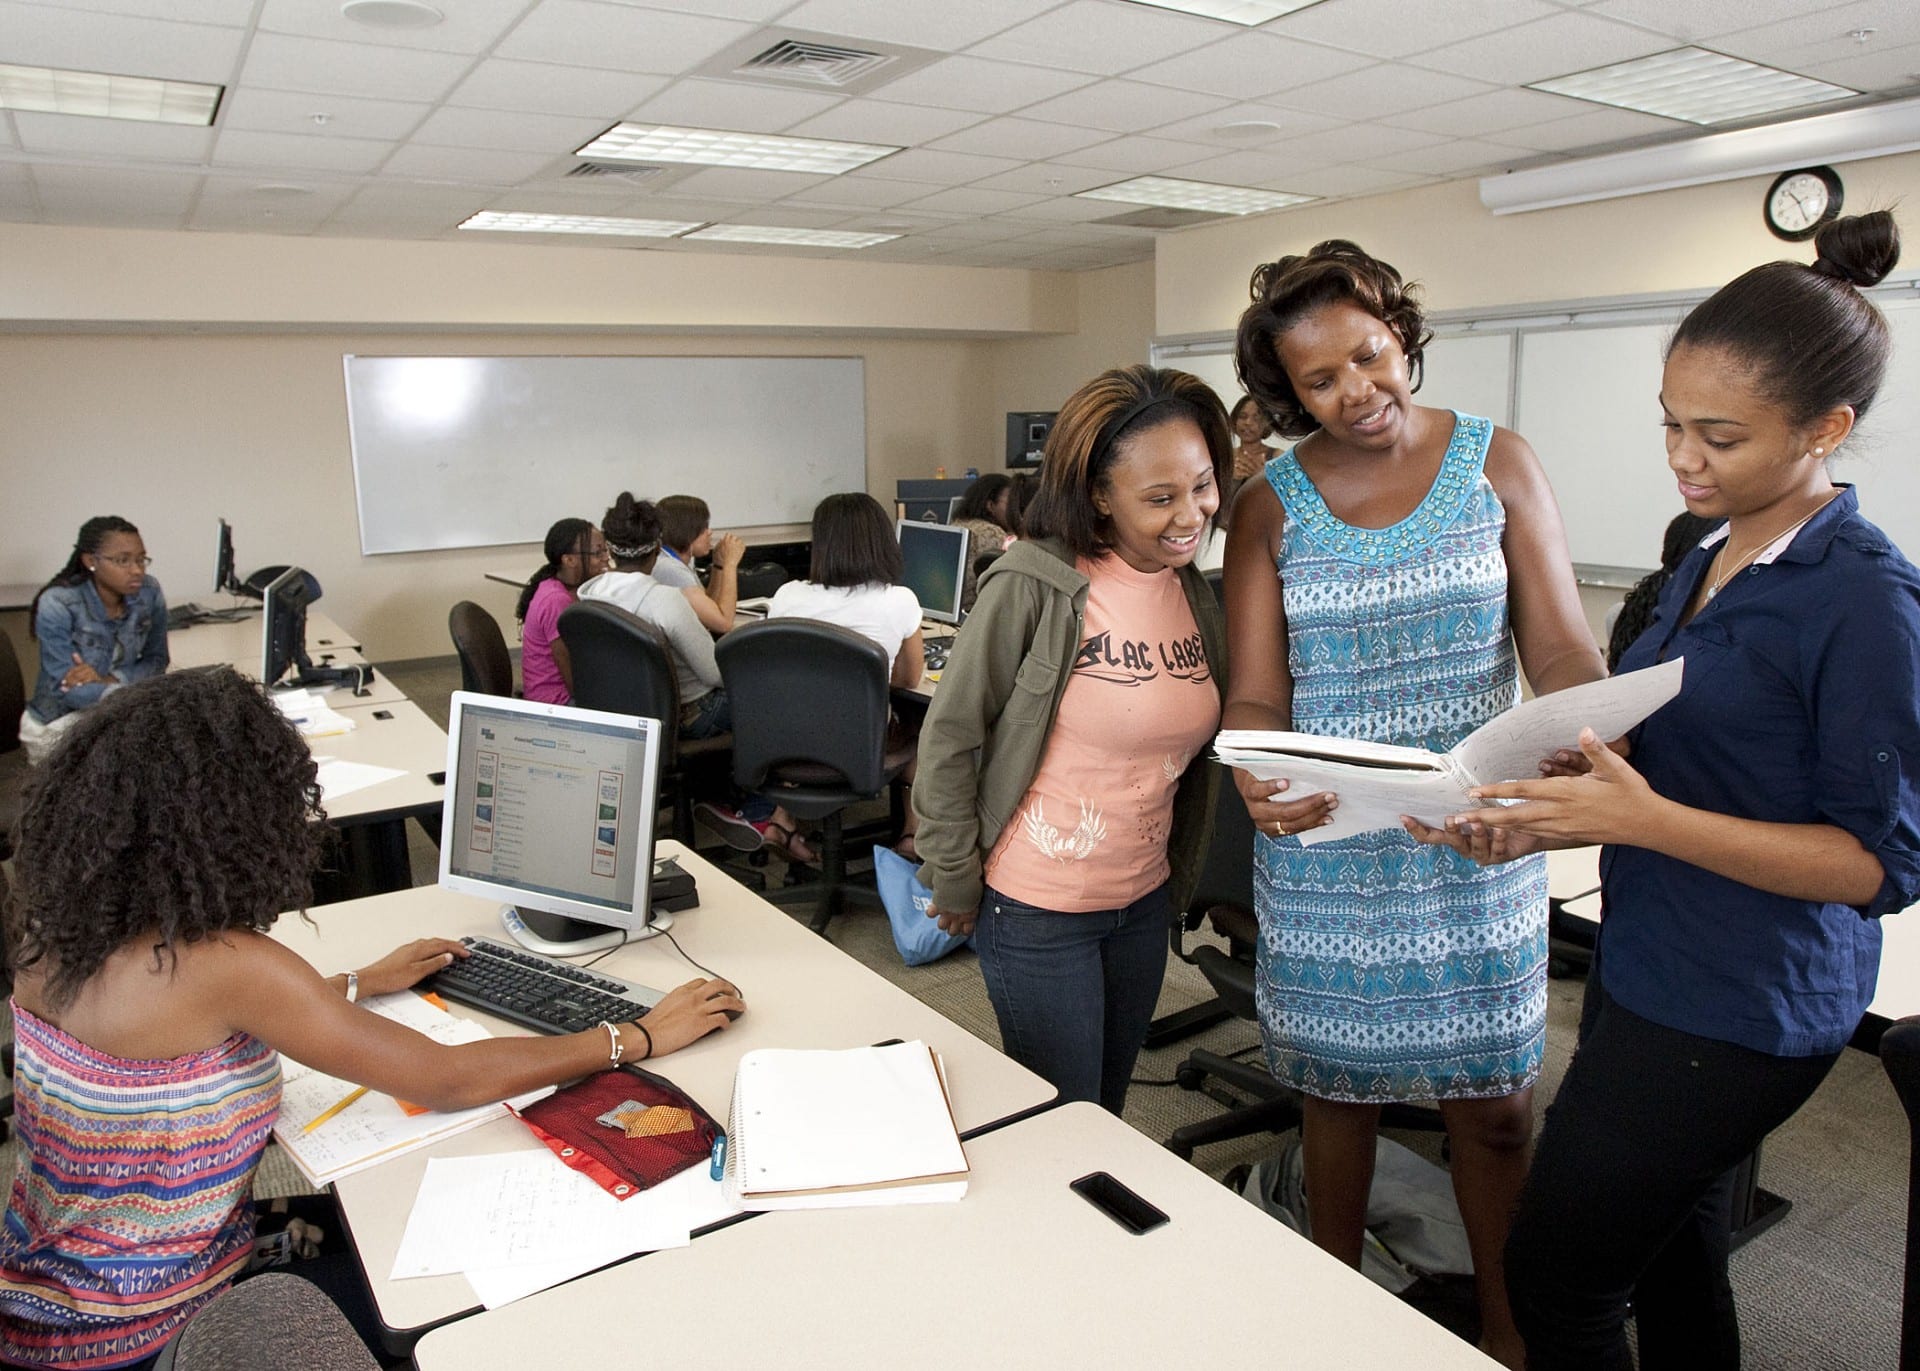 Image of a professor and several students working together in classroom near computers